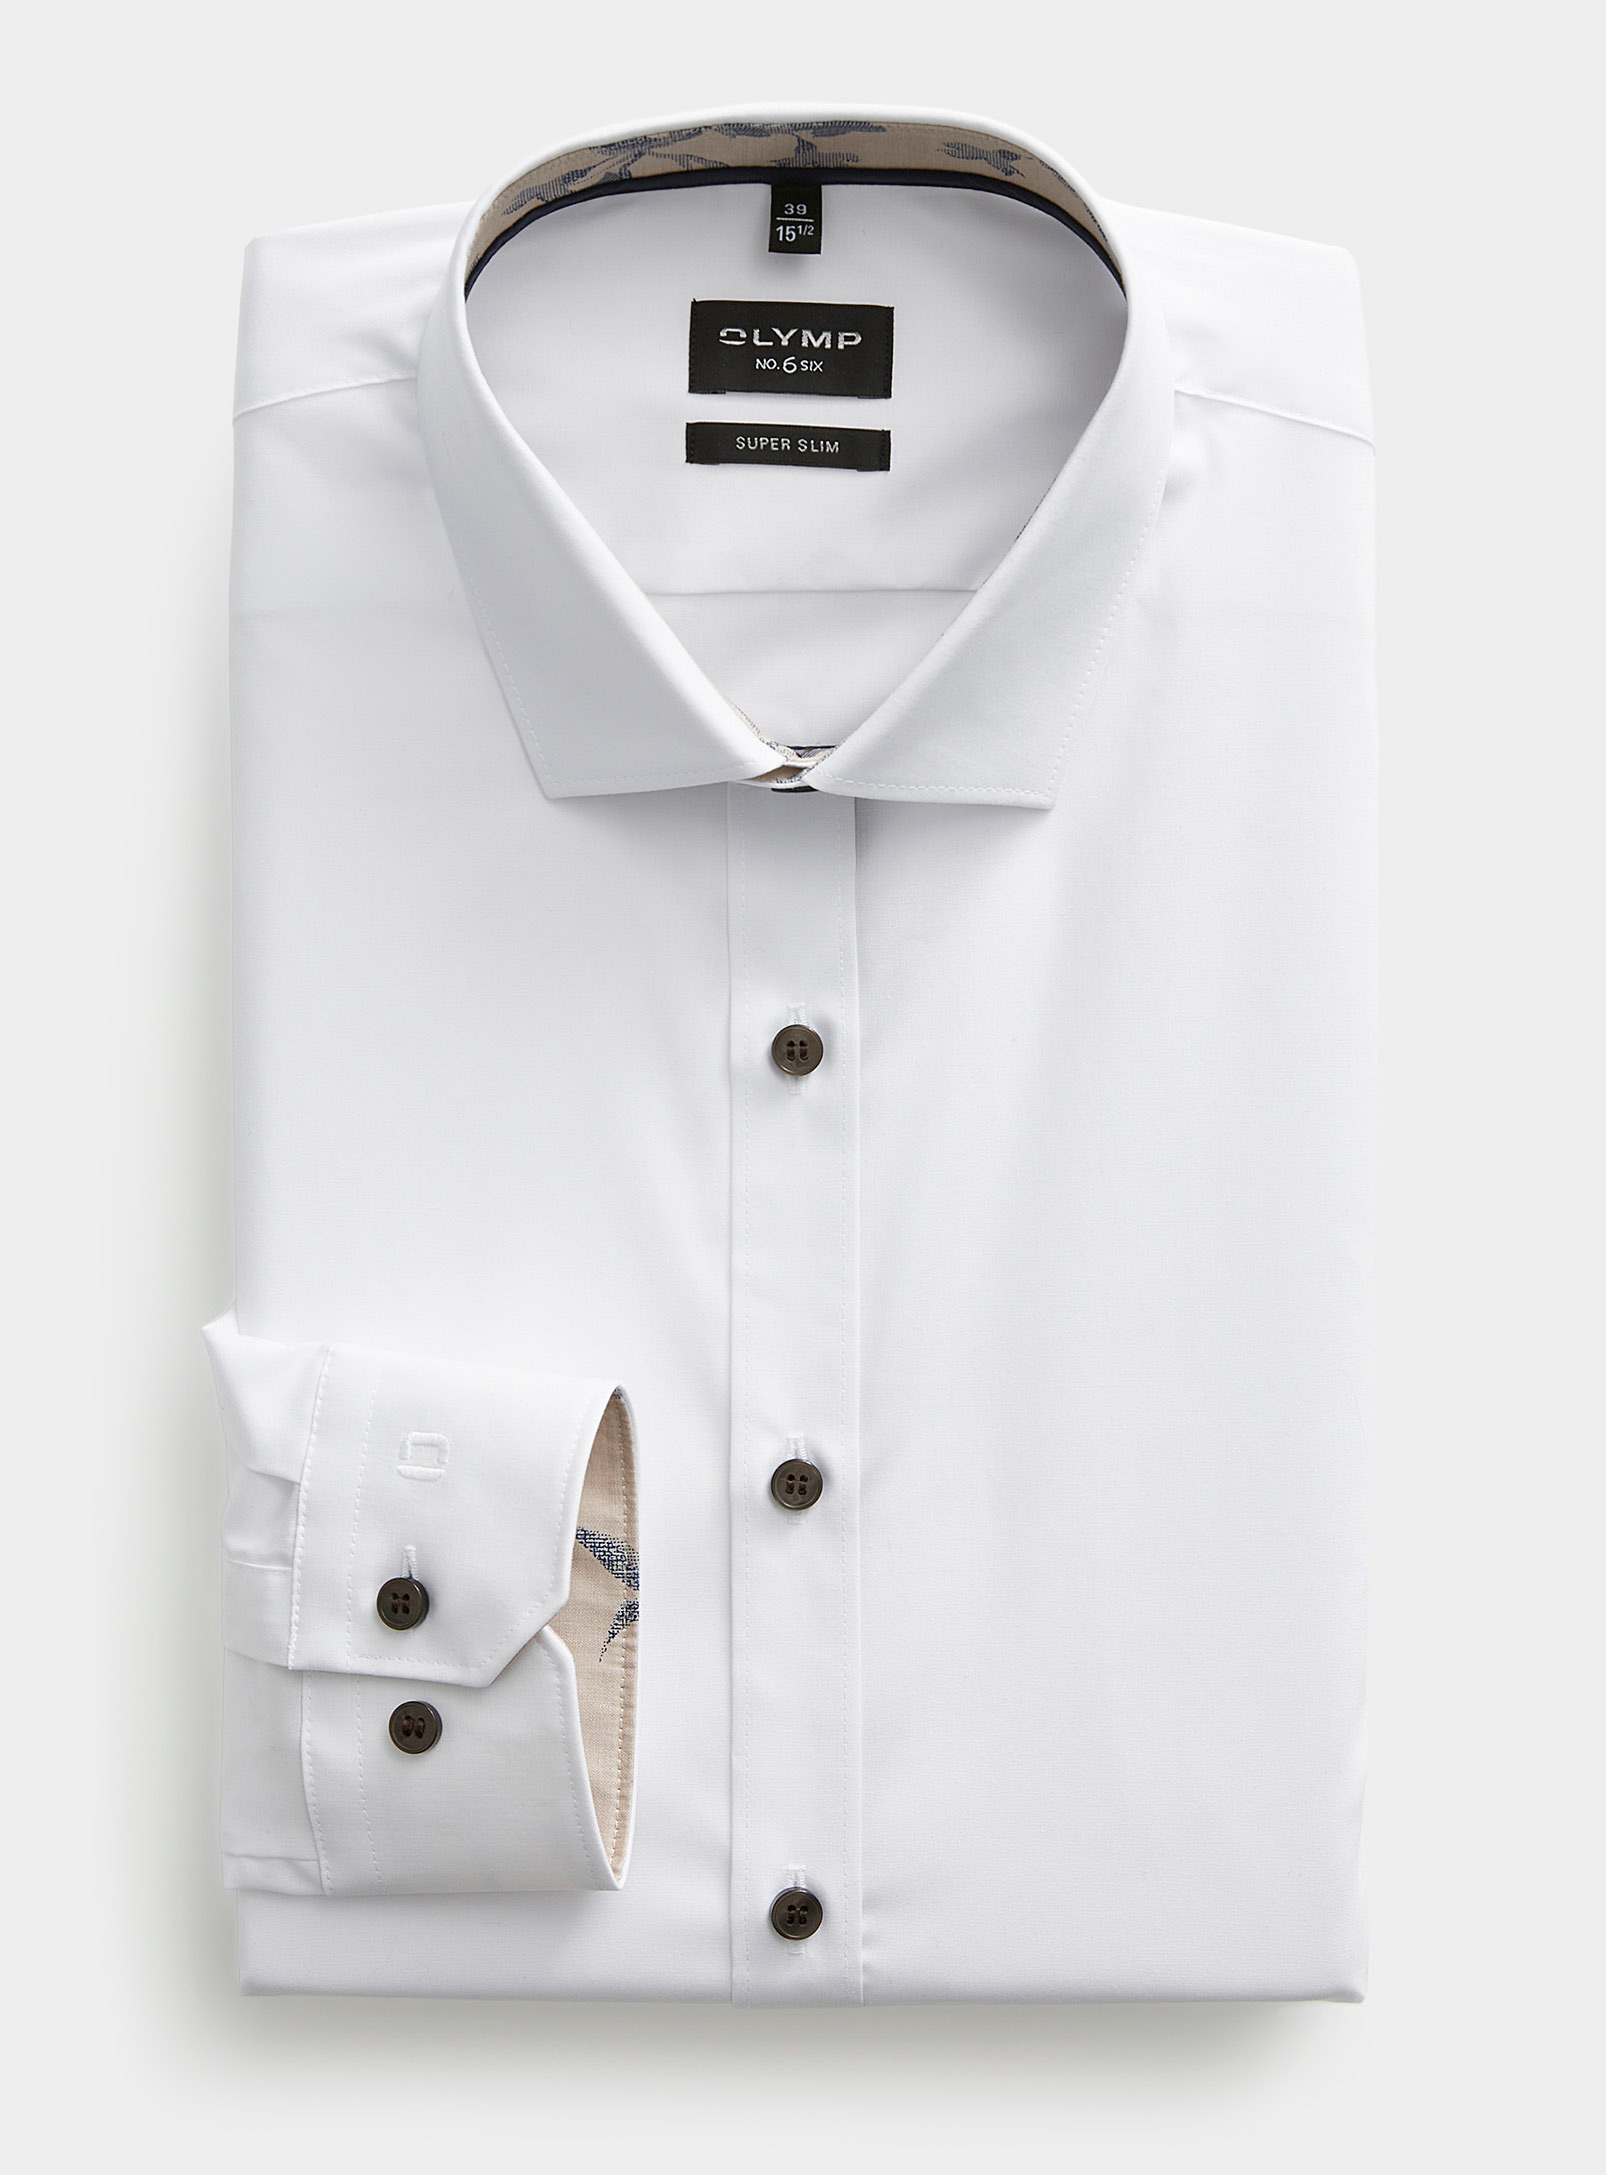 Olymp - Men's Contrast-button white shirt Slim fit